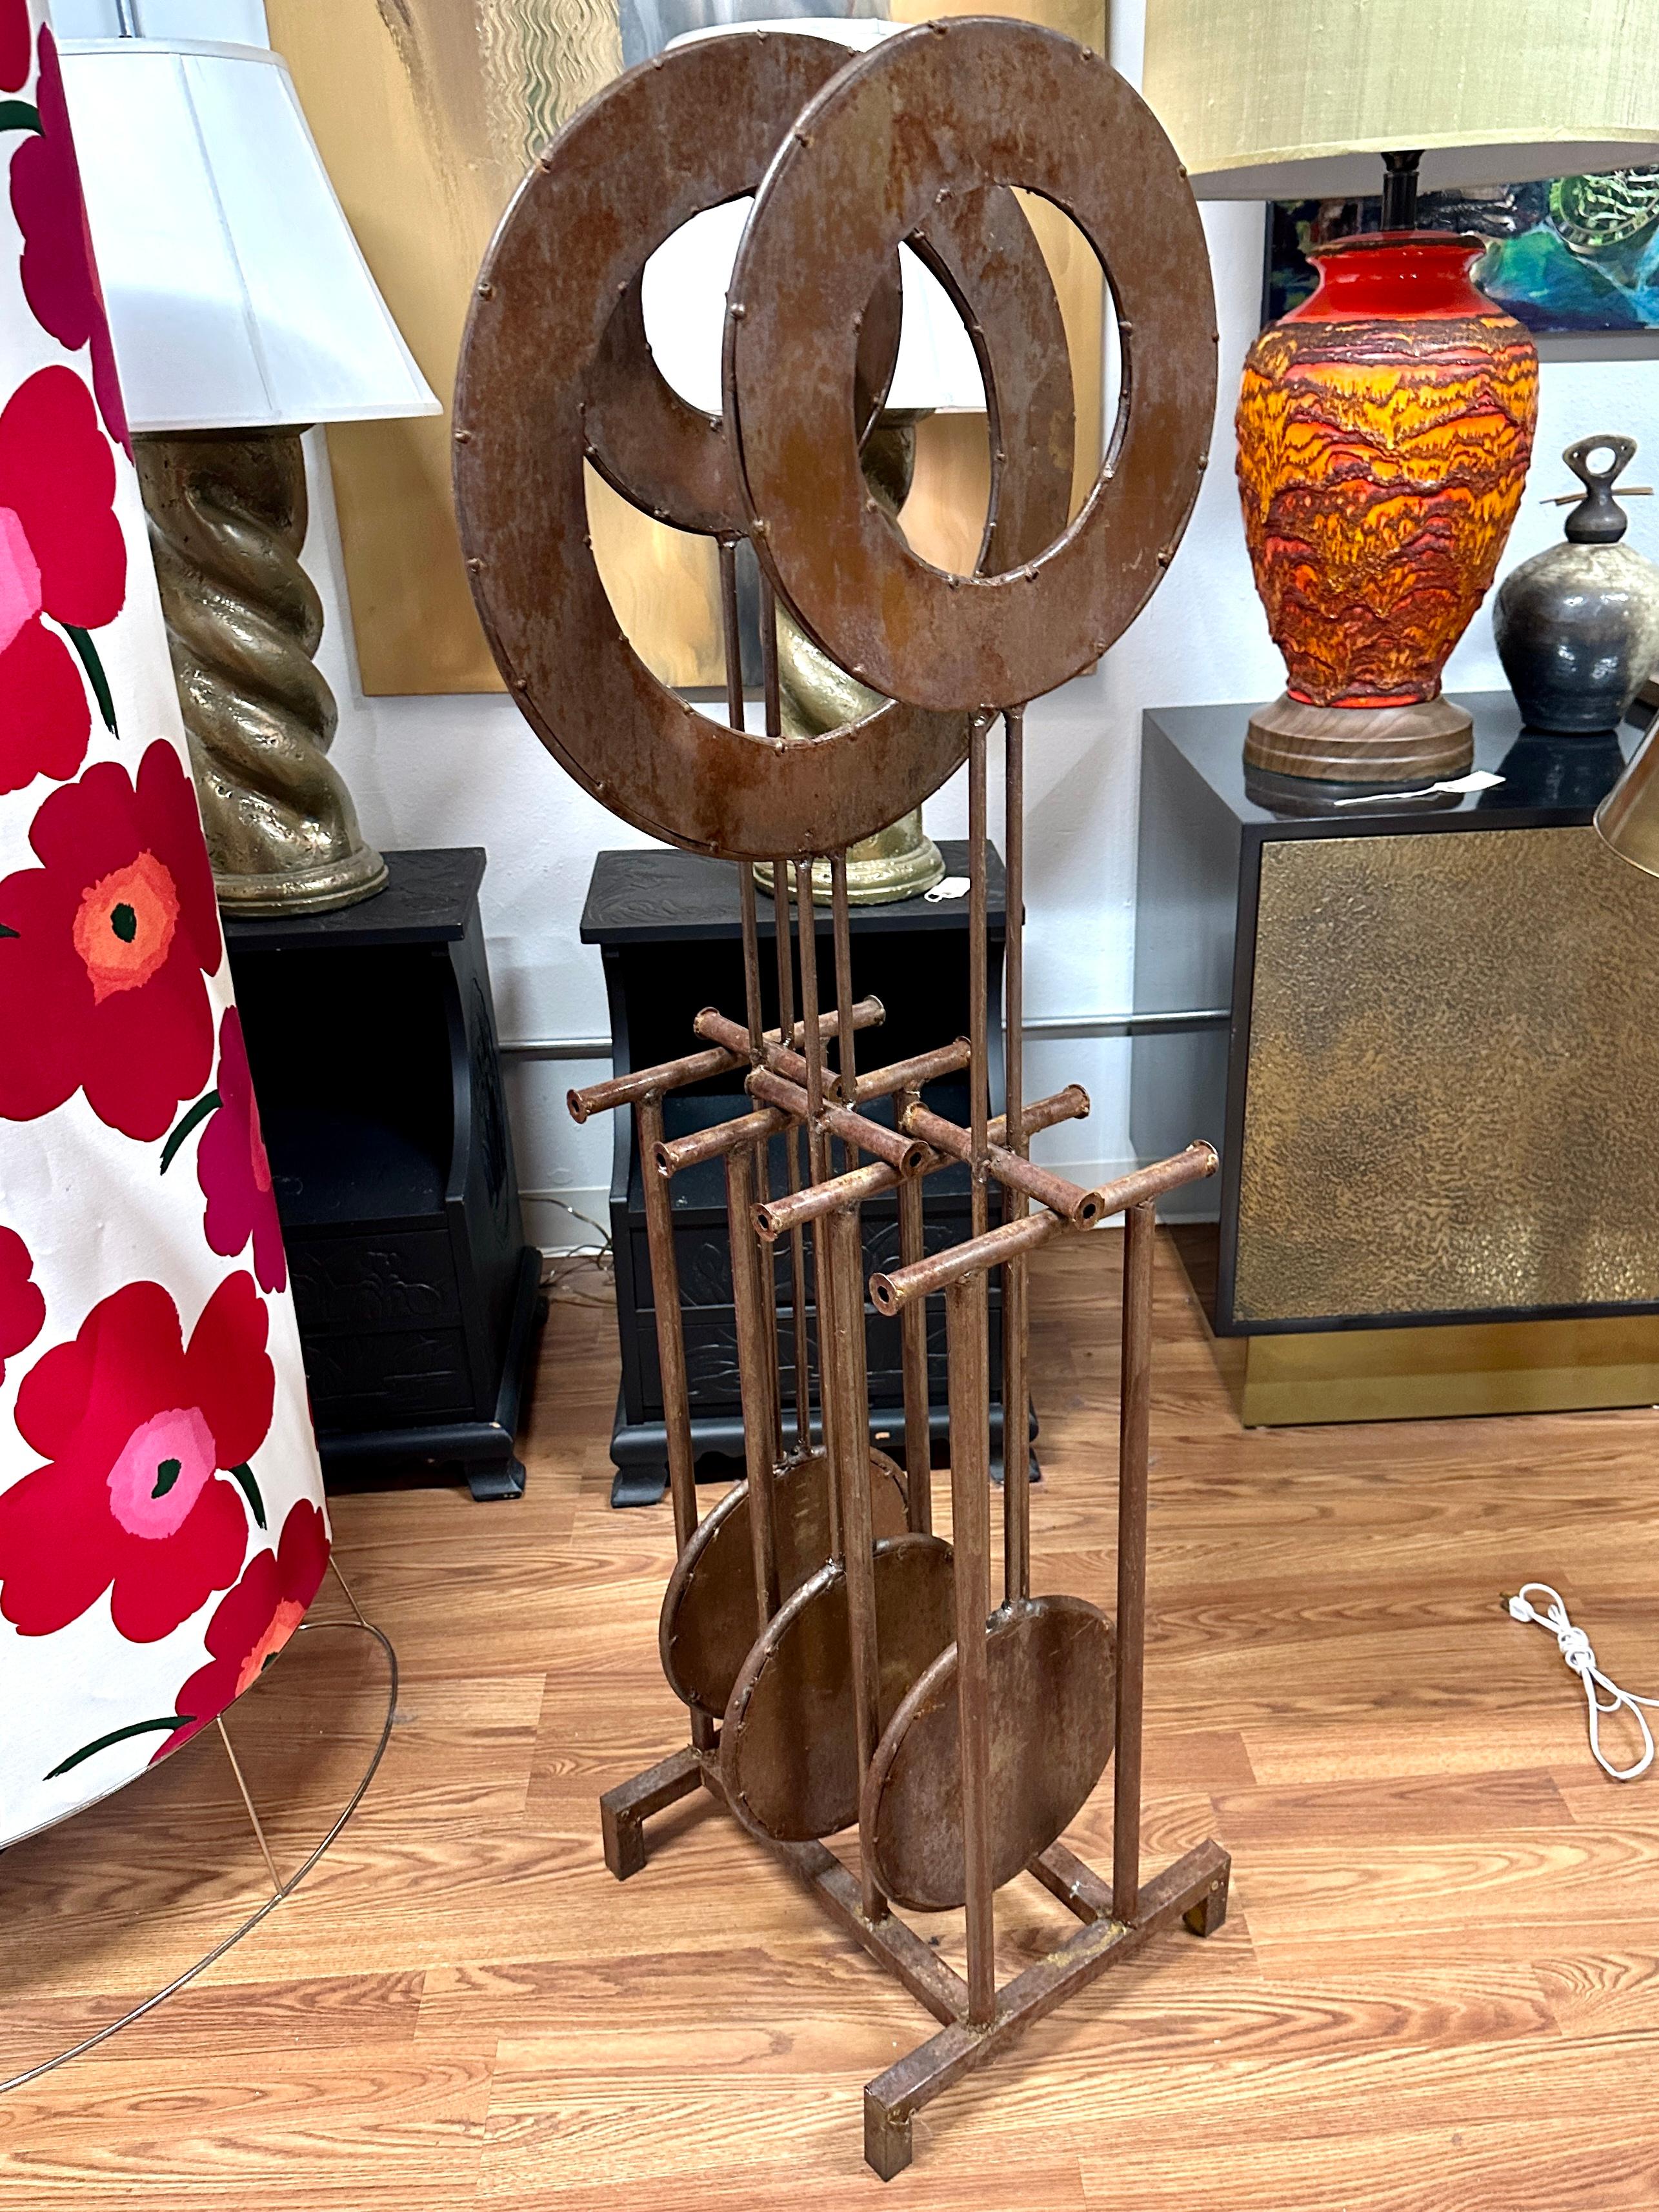 A wonderful Kinetic sculpture out of iron that has rusted to a beautiful patina. Works nicely, please see the attached video. Large and impressive, it will make a welcme addition to your garden or courtyard. Nicely spot welded discs attached to a